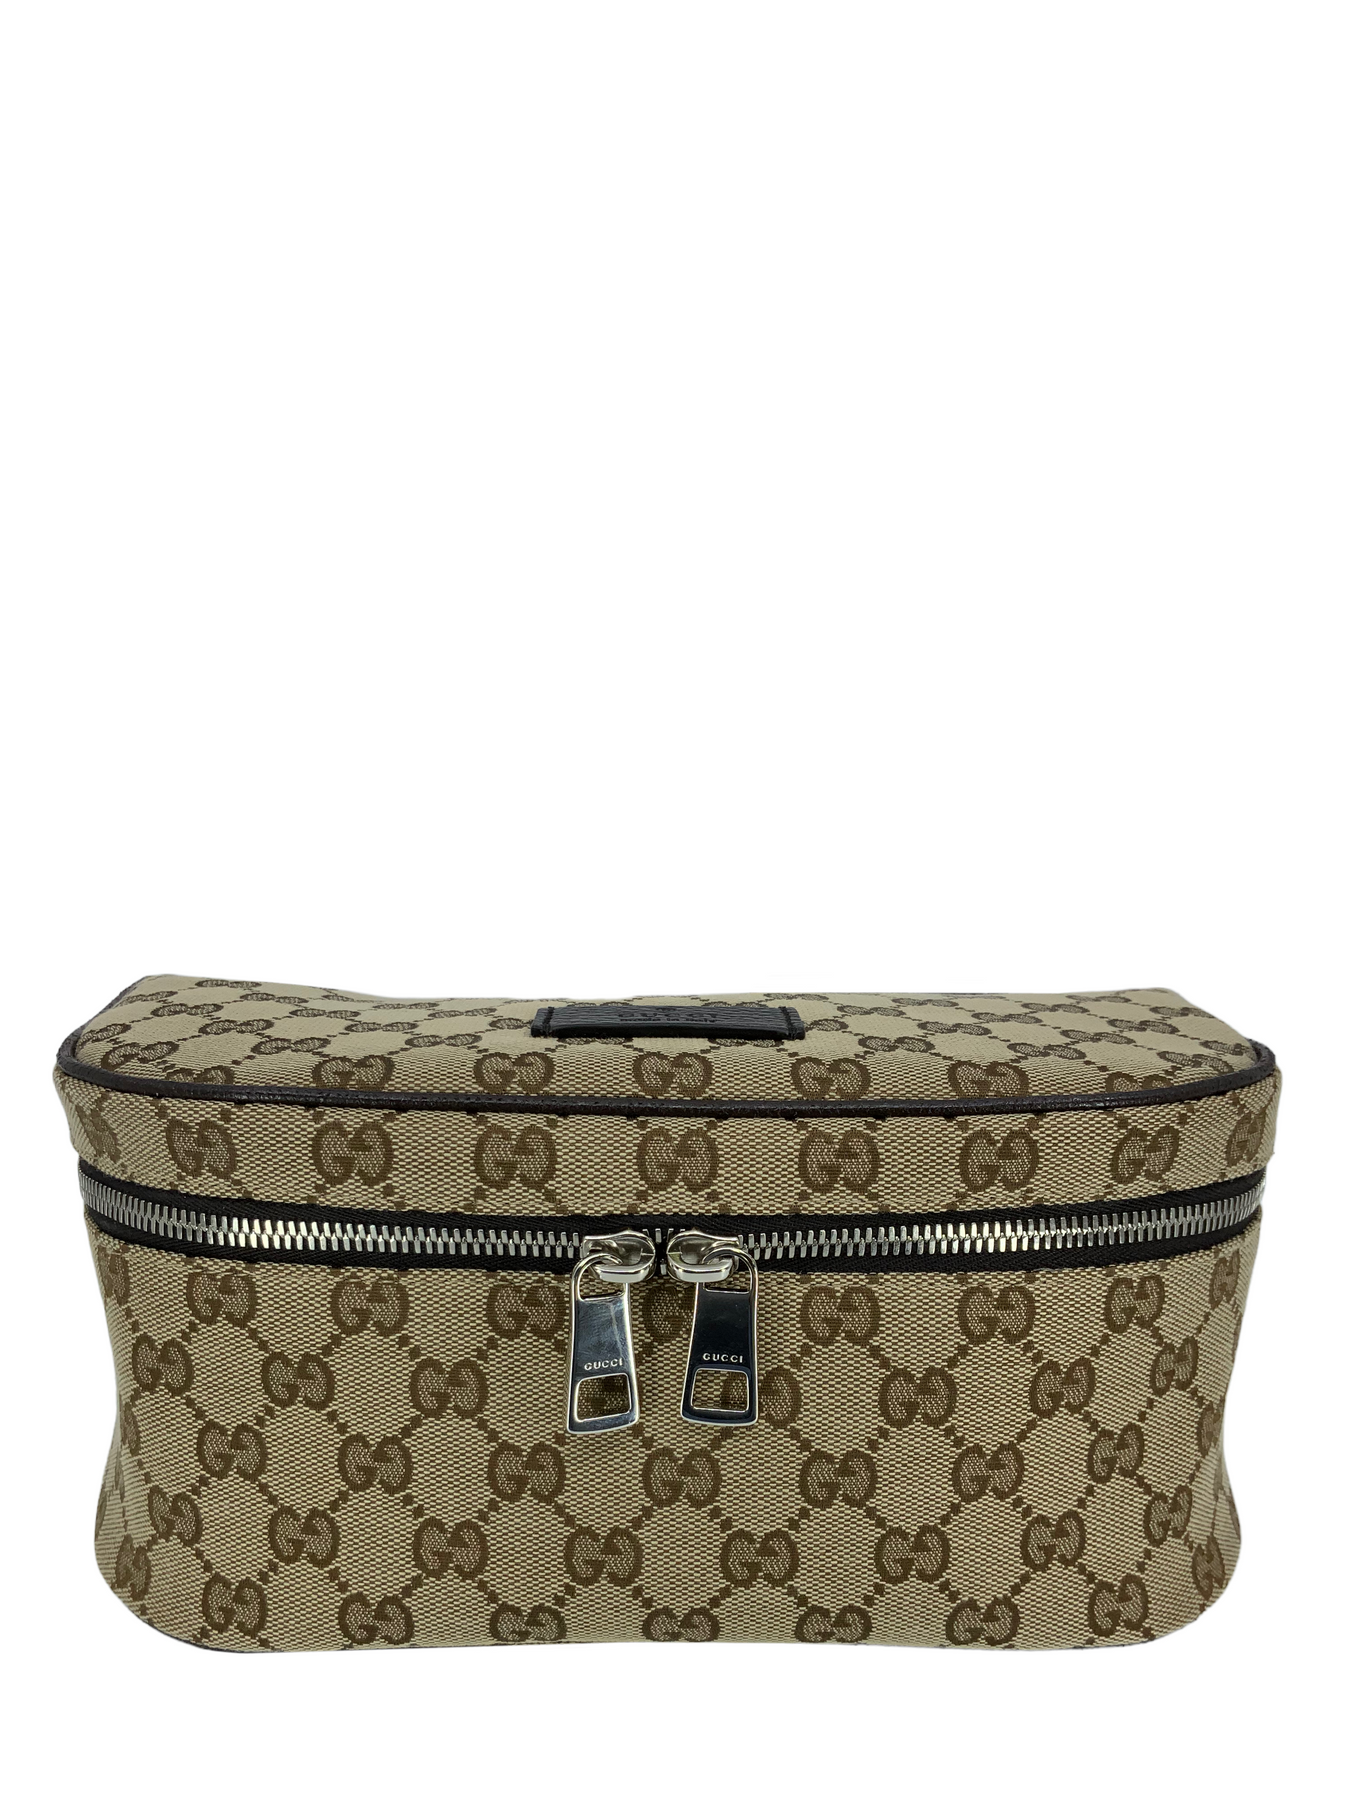 Gucci GG Monogram Canvas Waist Pouch NEW - Consigned Designs